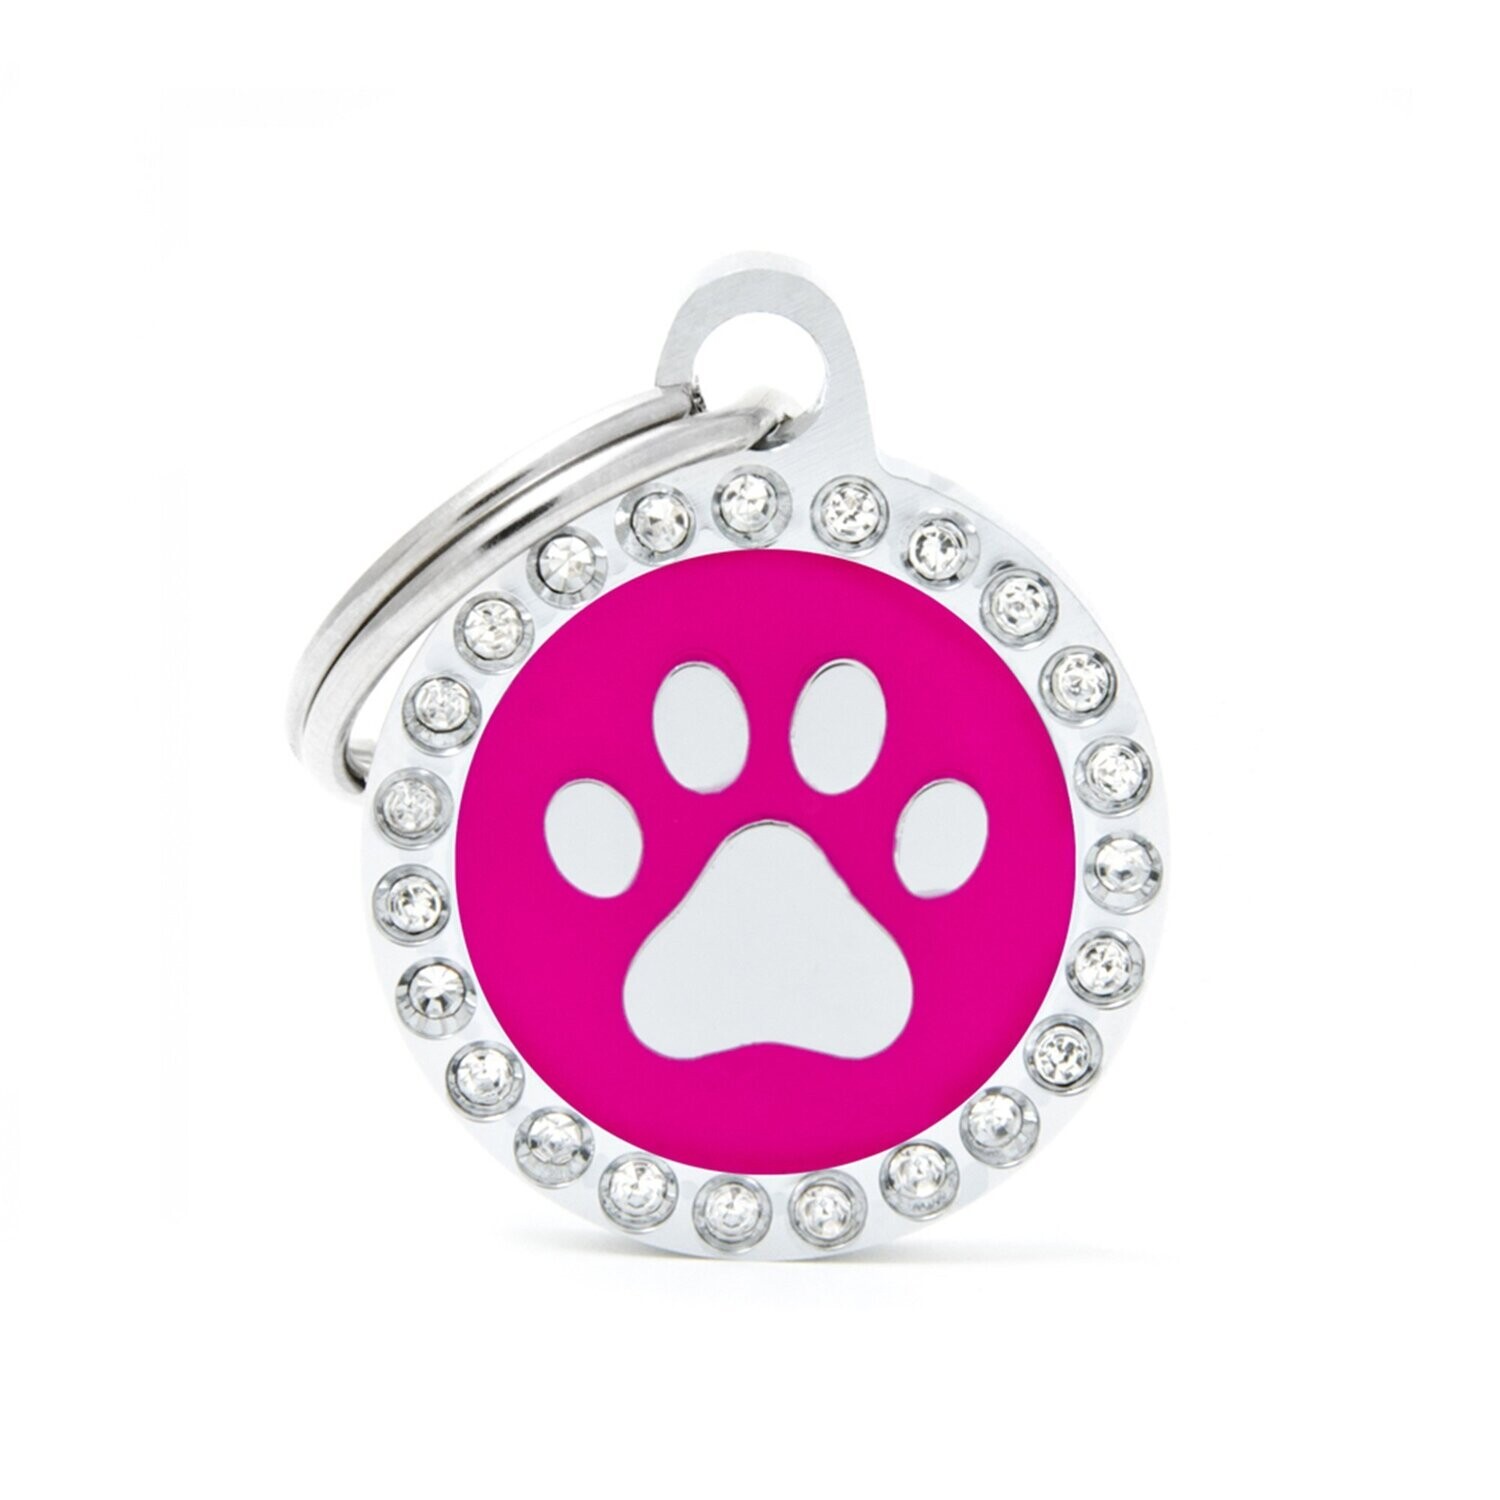 My Family Glam Pink Paw